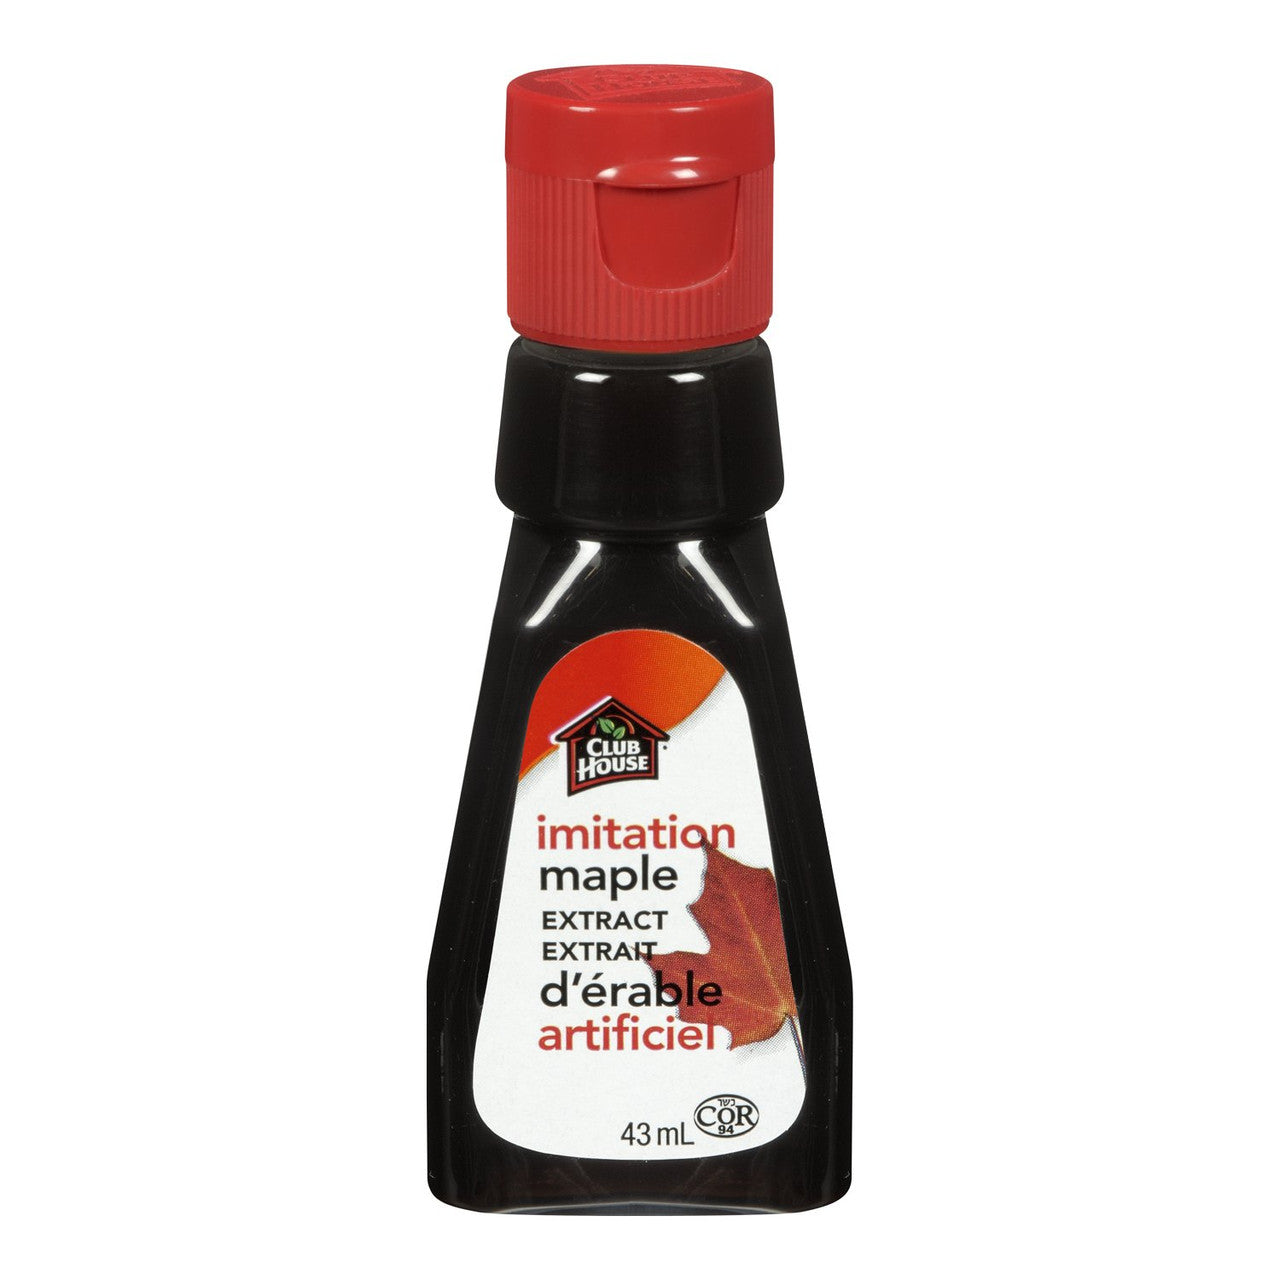 Club House, Quality Baking & Flavouring Extracts, Imitation Maple, 43ml/1.5oz.,{Imported from Canada}